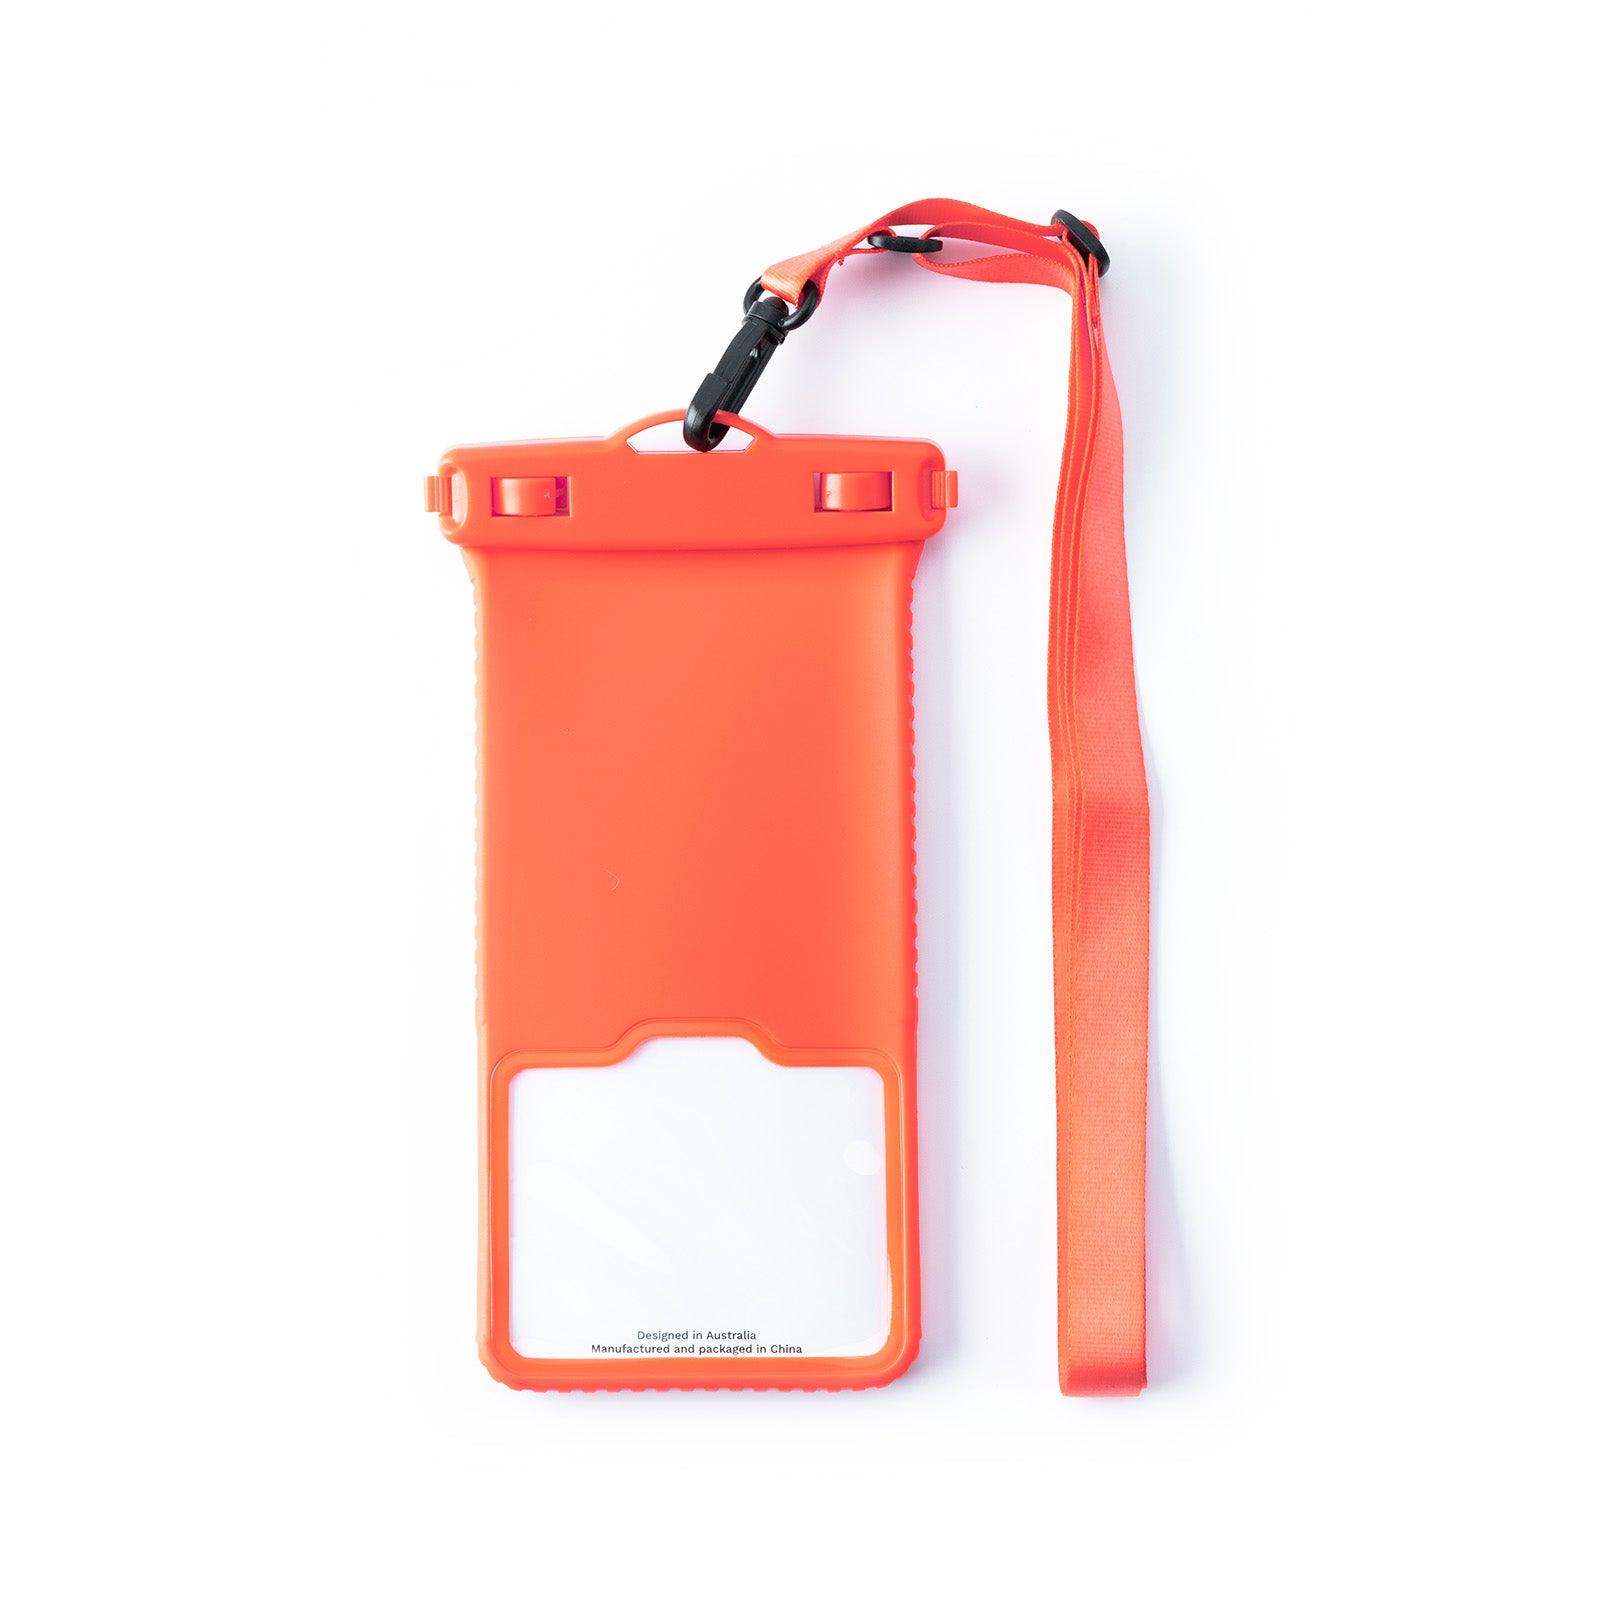 Orange IPX8 Certified Water Proof Bag with Lanyard - CORECOLOUR AU